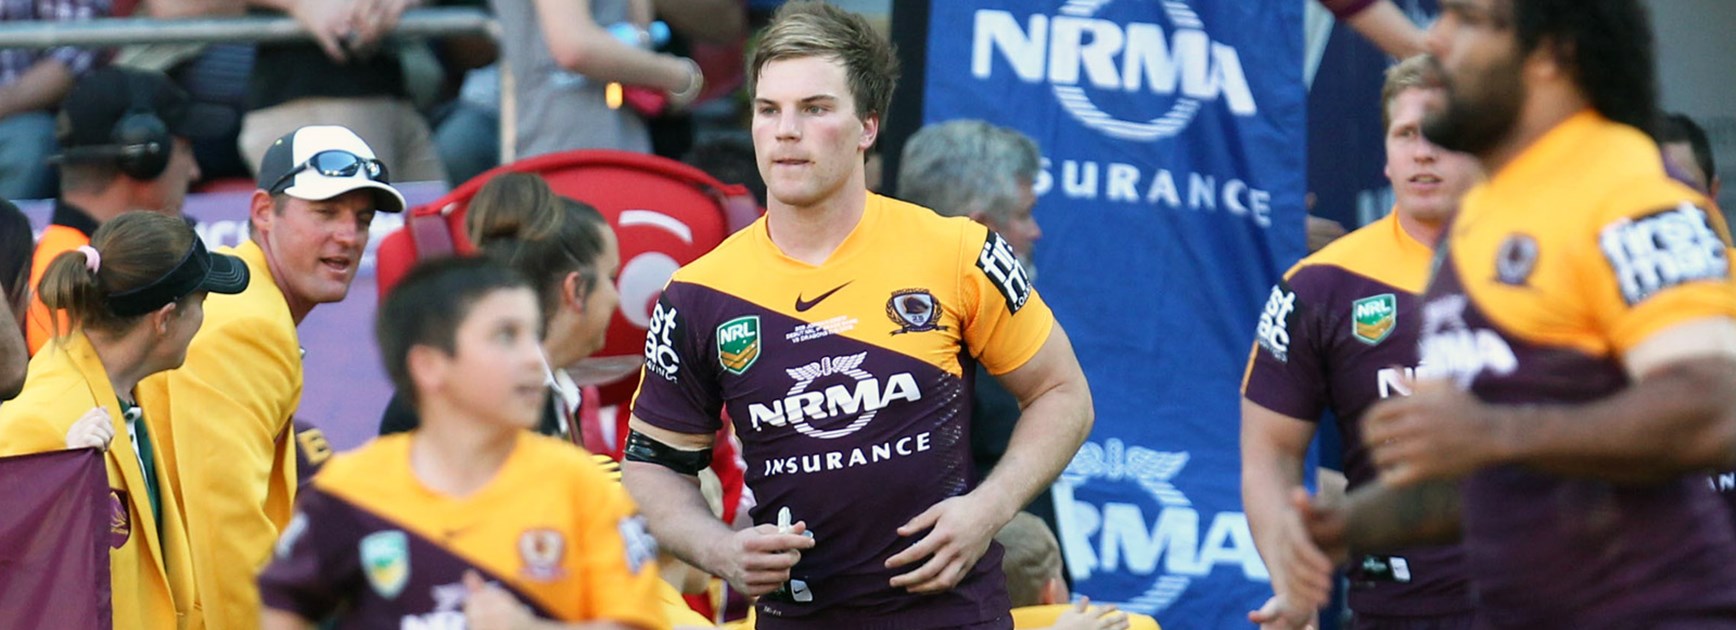 Broncos young gun Jordan Drew has completed an off-season move to the Sharks.